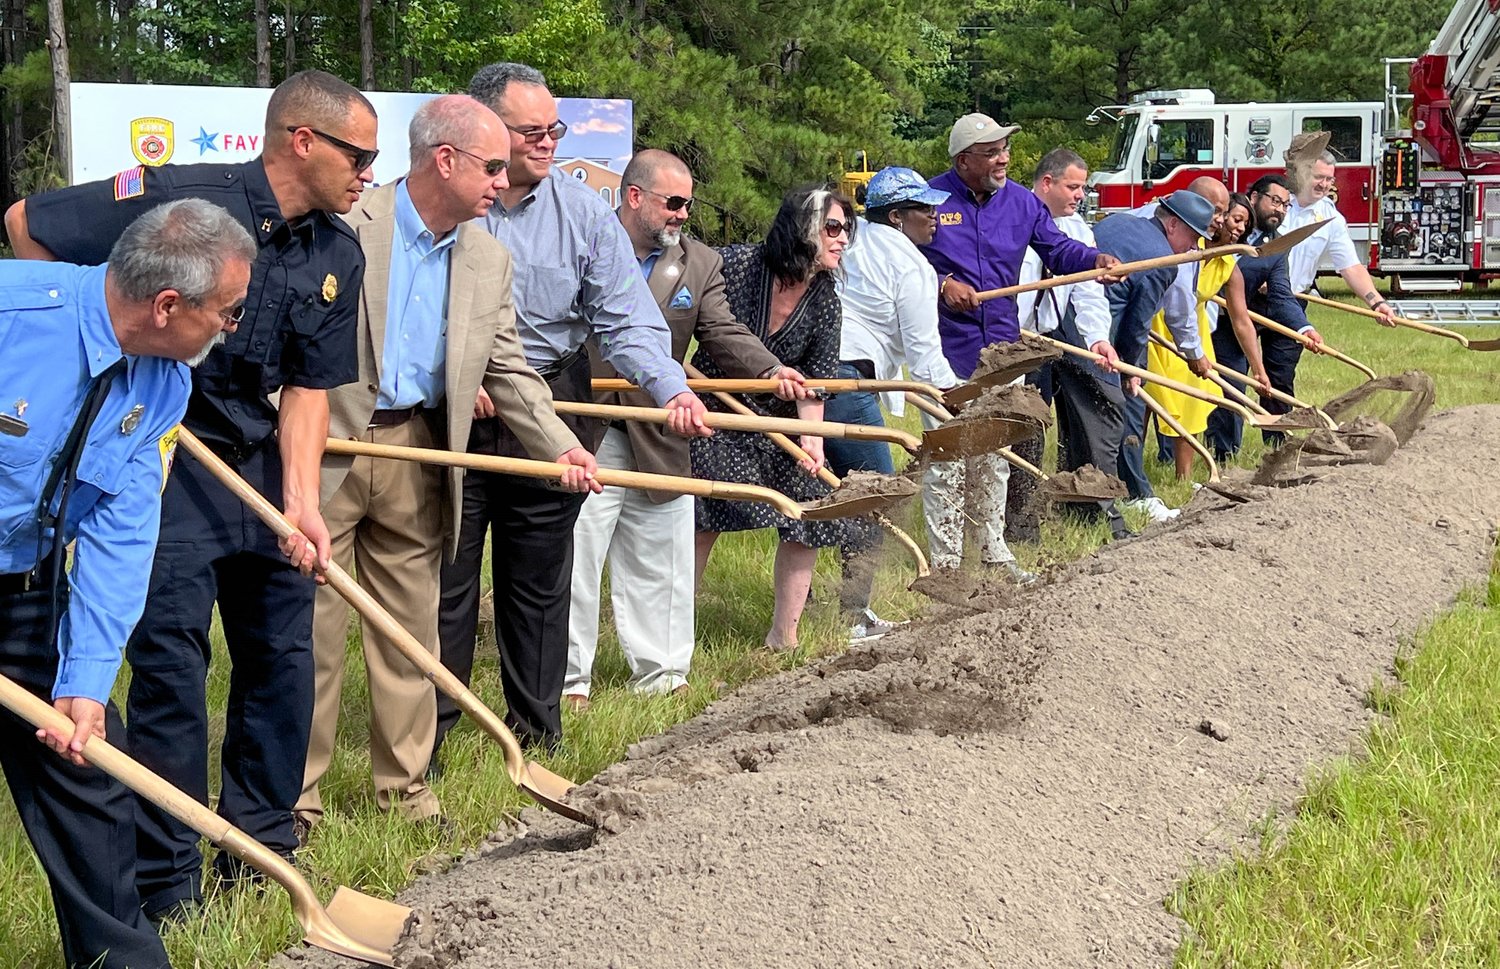 Fayetteville Fire Department and City Council members broke ground for a new Fire Station No. 4 on Bragg Boulevard on Tuesday.